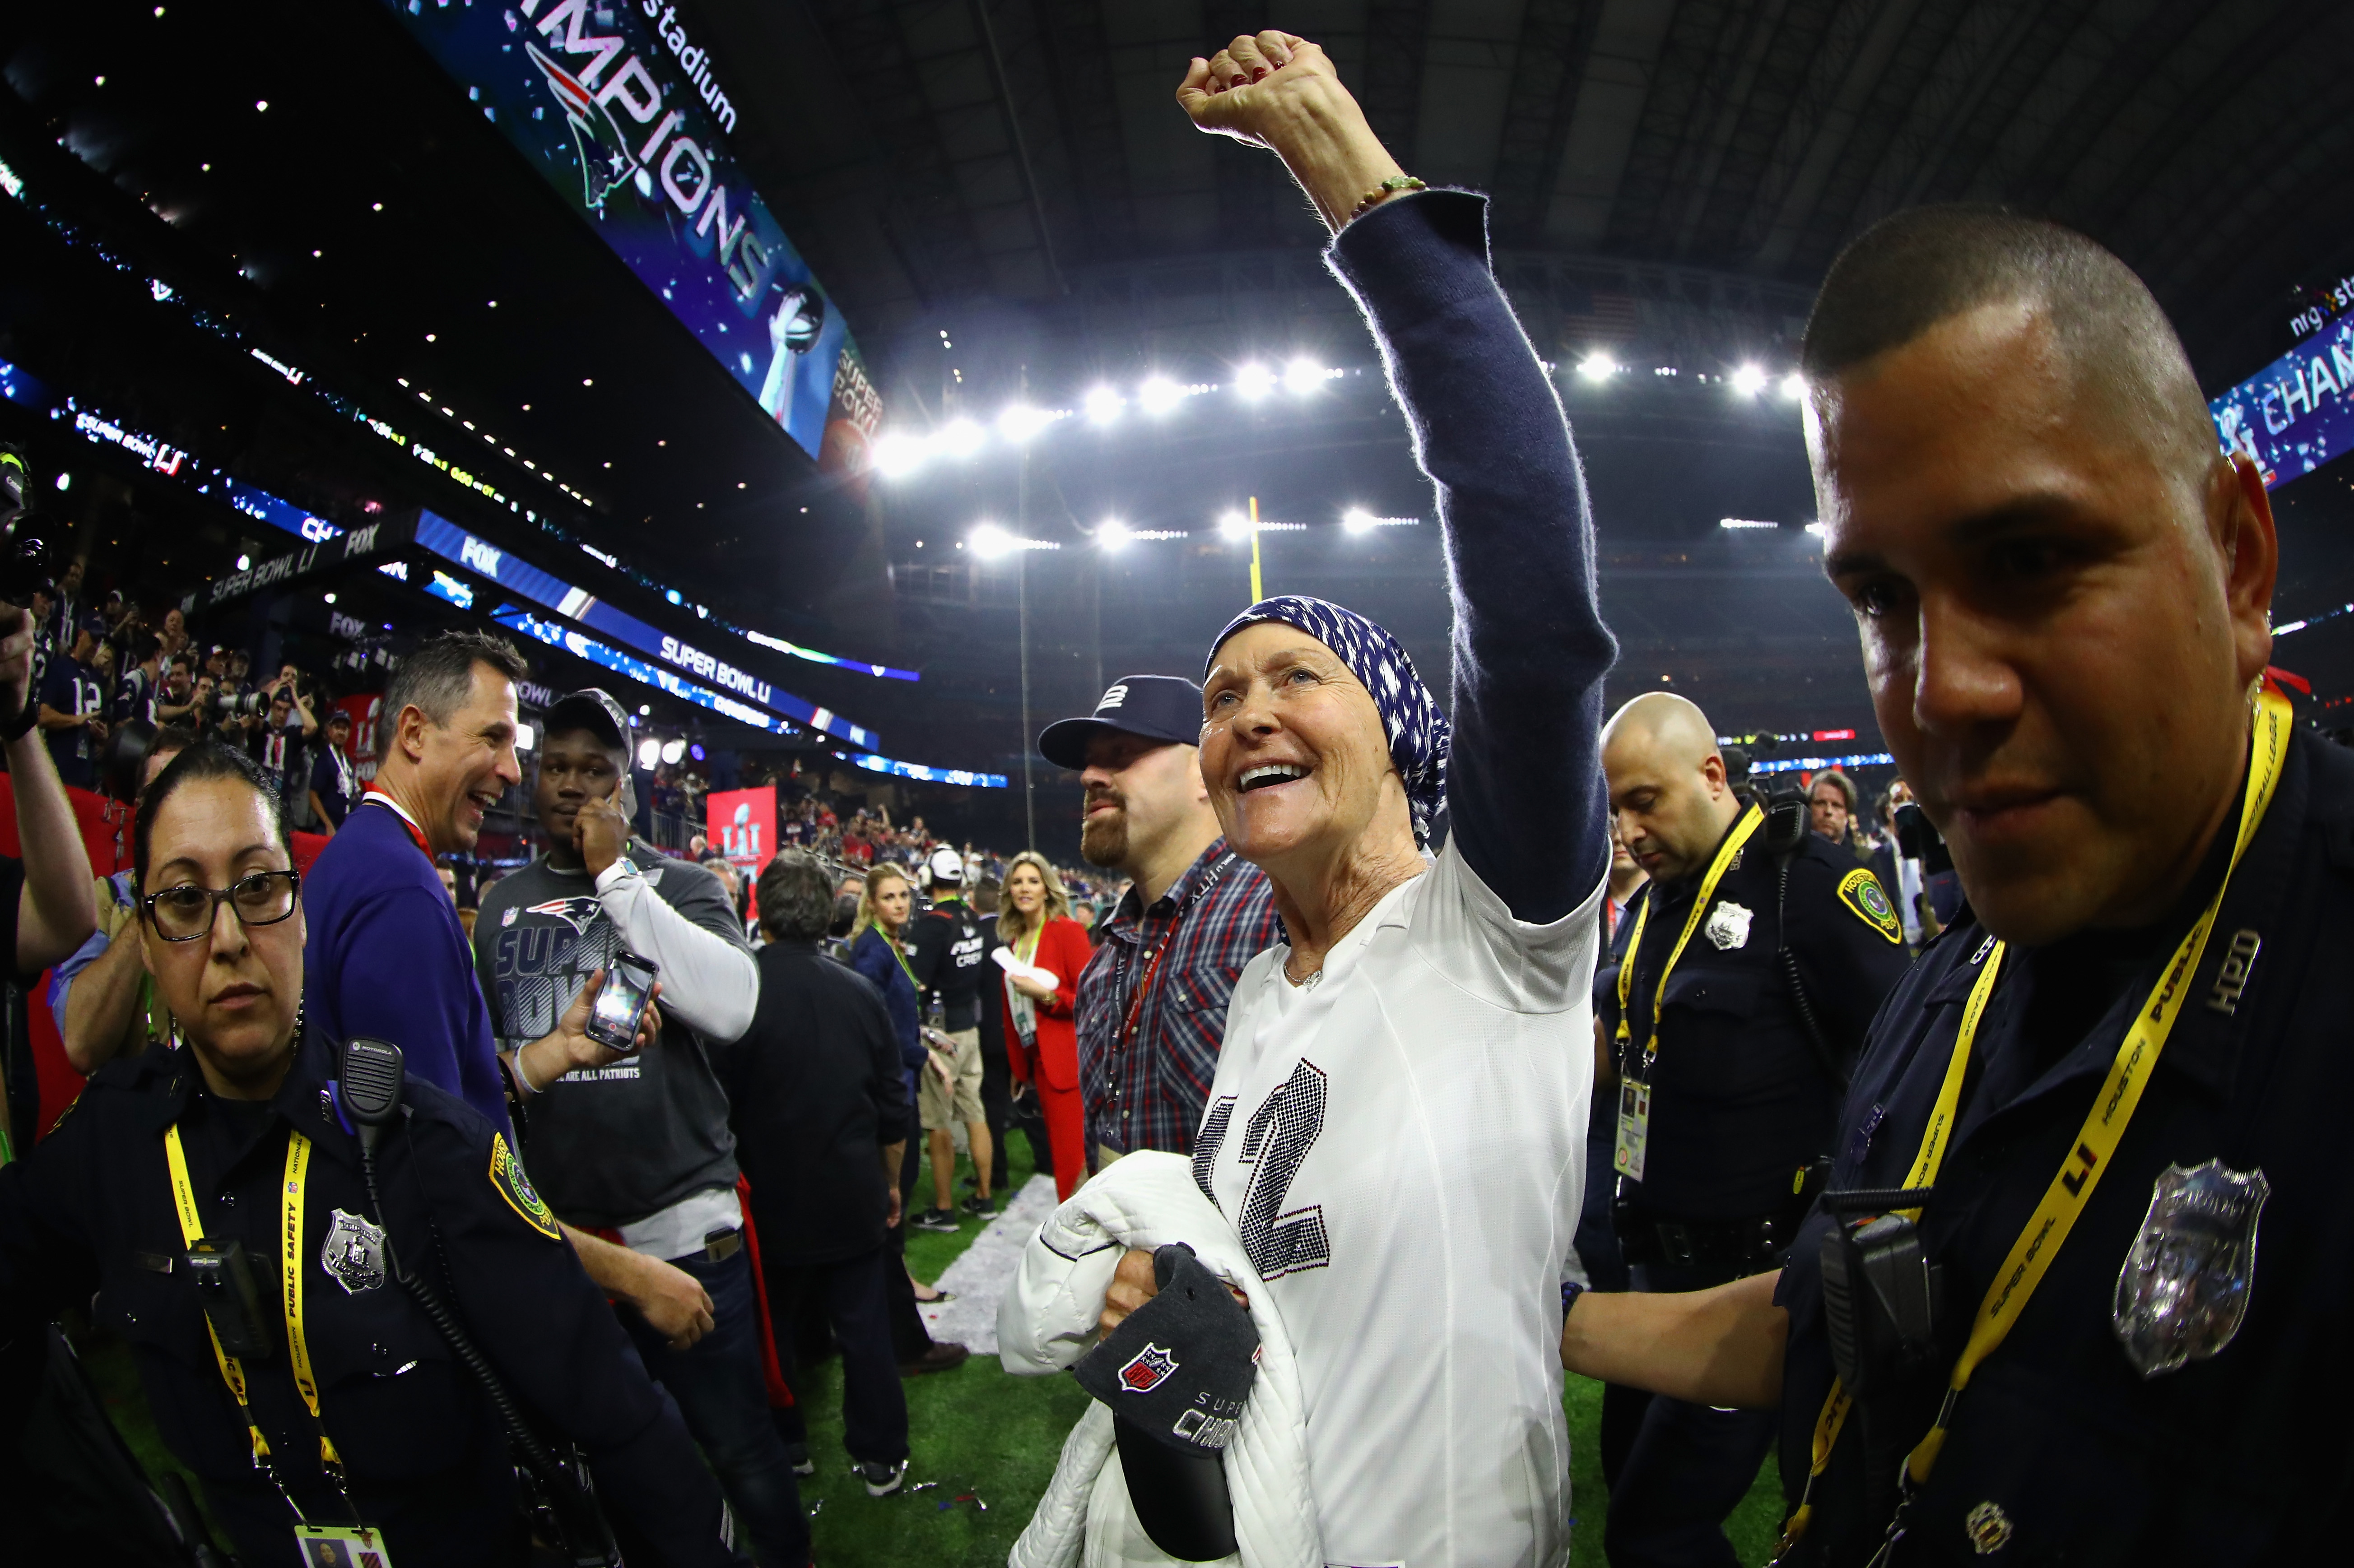 Galynn Brady celebrates during Super Bowl 51 on February 5, 2017 in Houston, Texas | Source: Getty Images